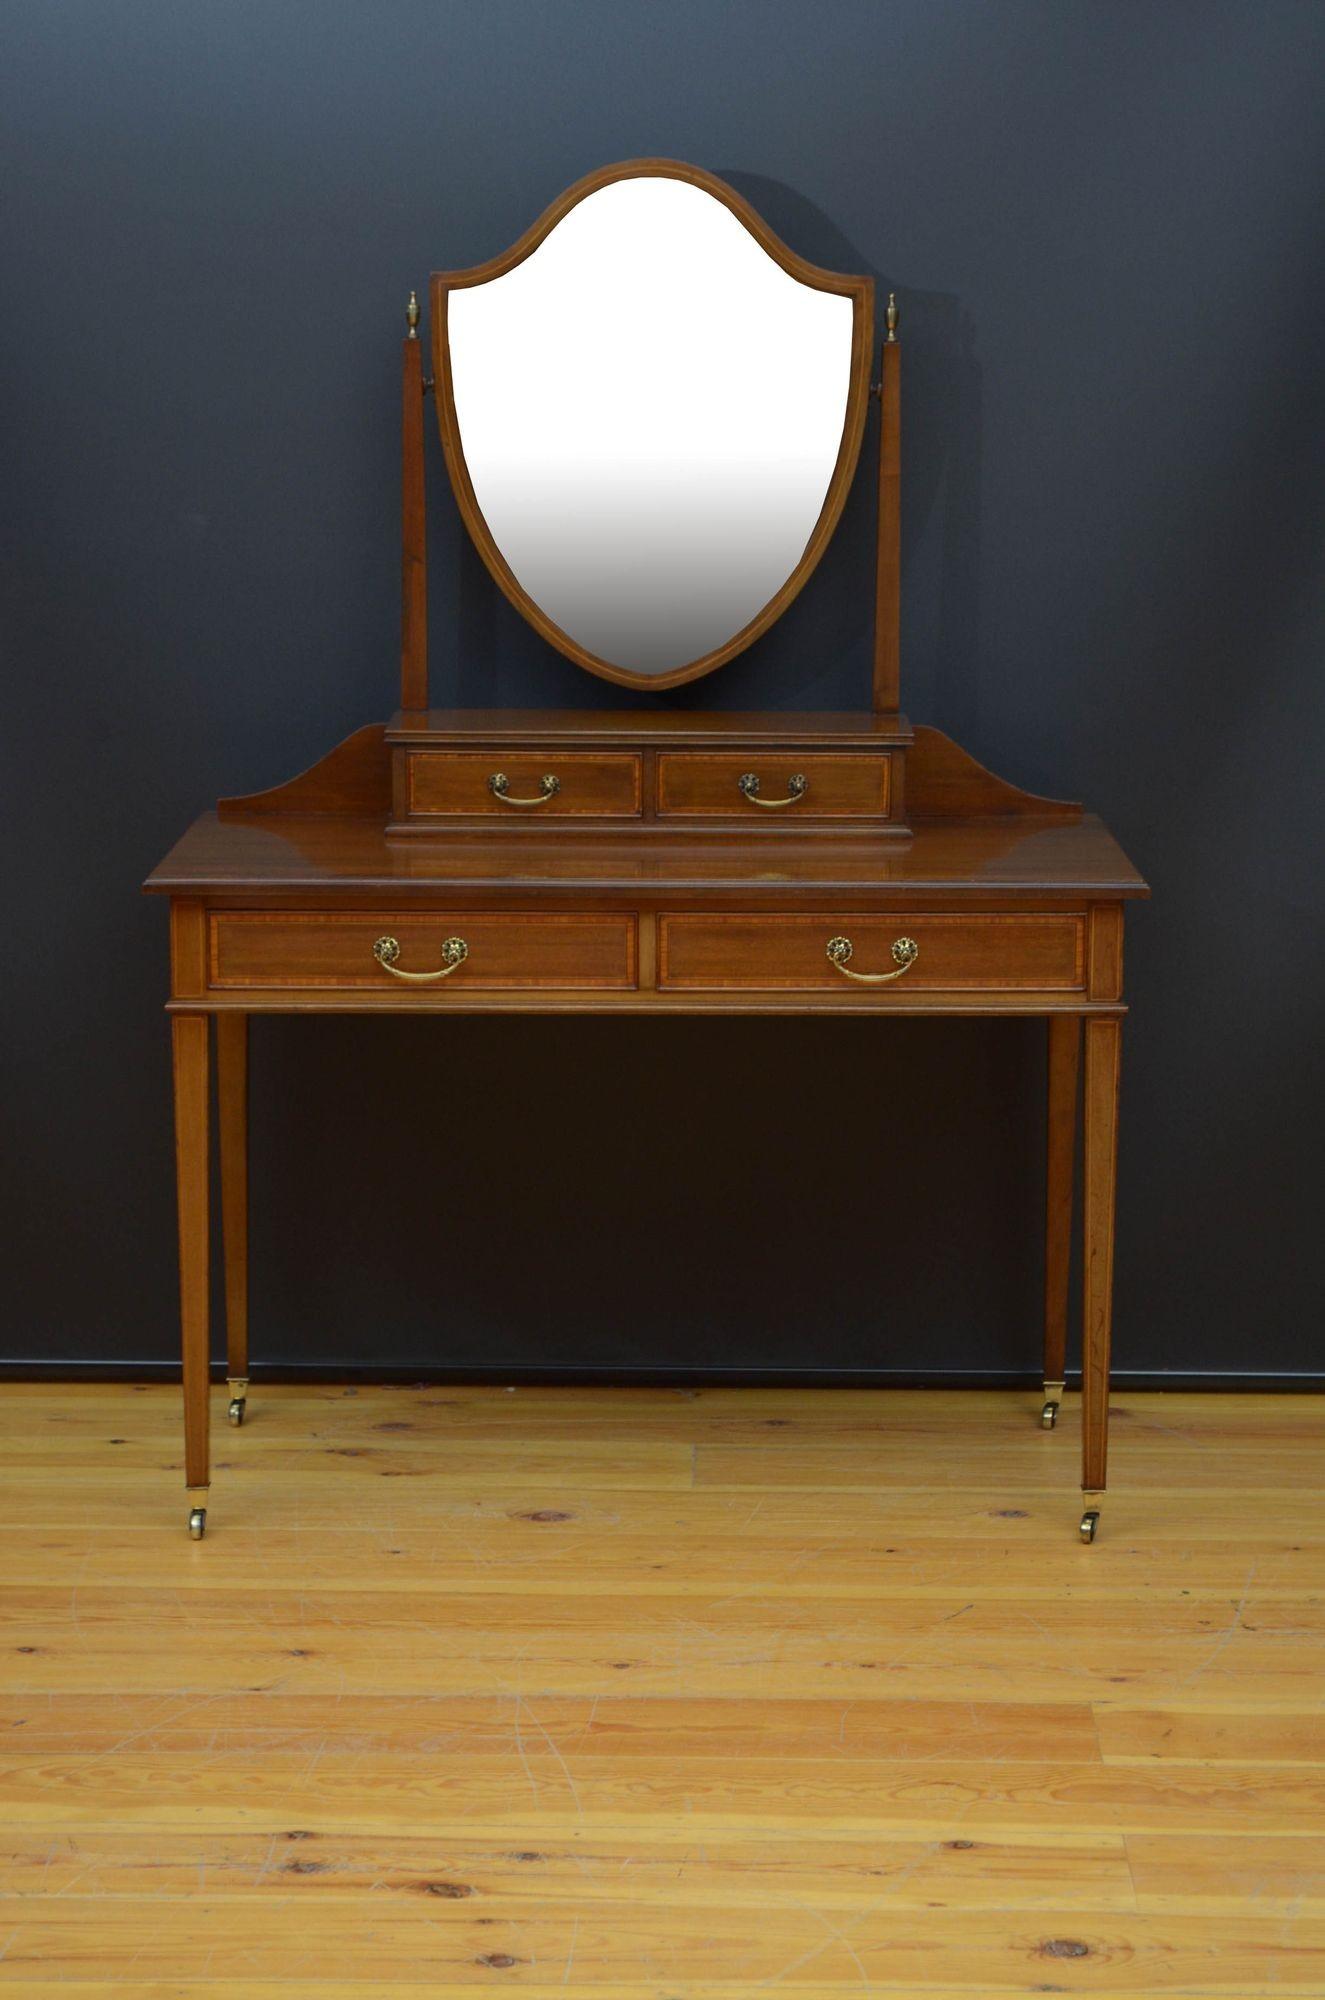 R025 Fine and elegant Edwardian mahogany dressing table, having original bevelled edge mirror with minor foxing in shield shaped frame on slender supports with decorative brass urns above two jewellery drawers and figured mahogany top with moulded